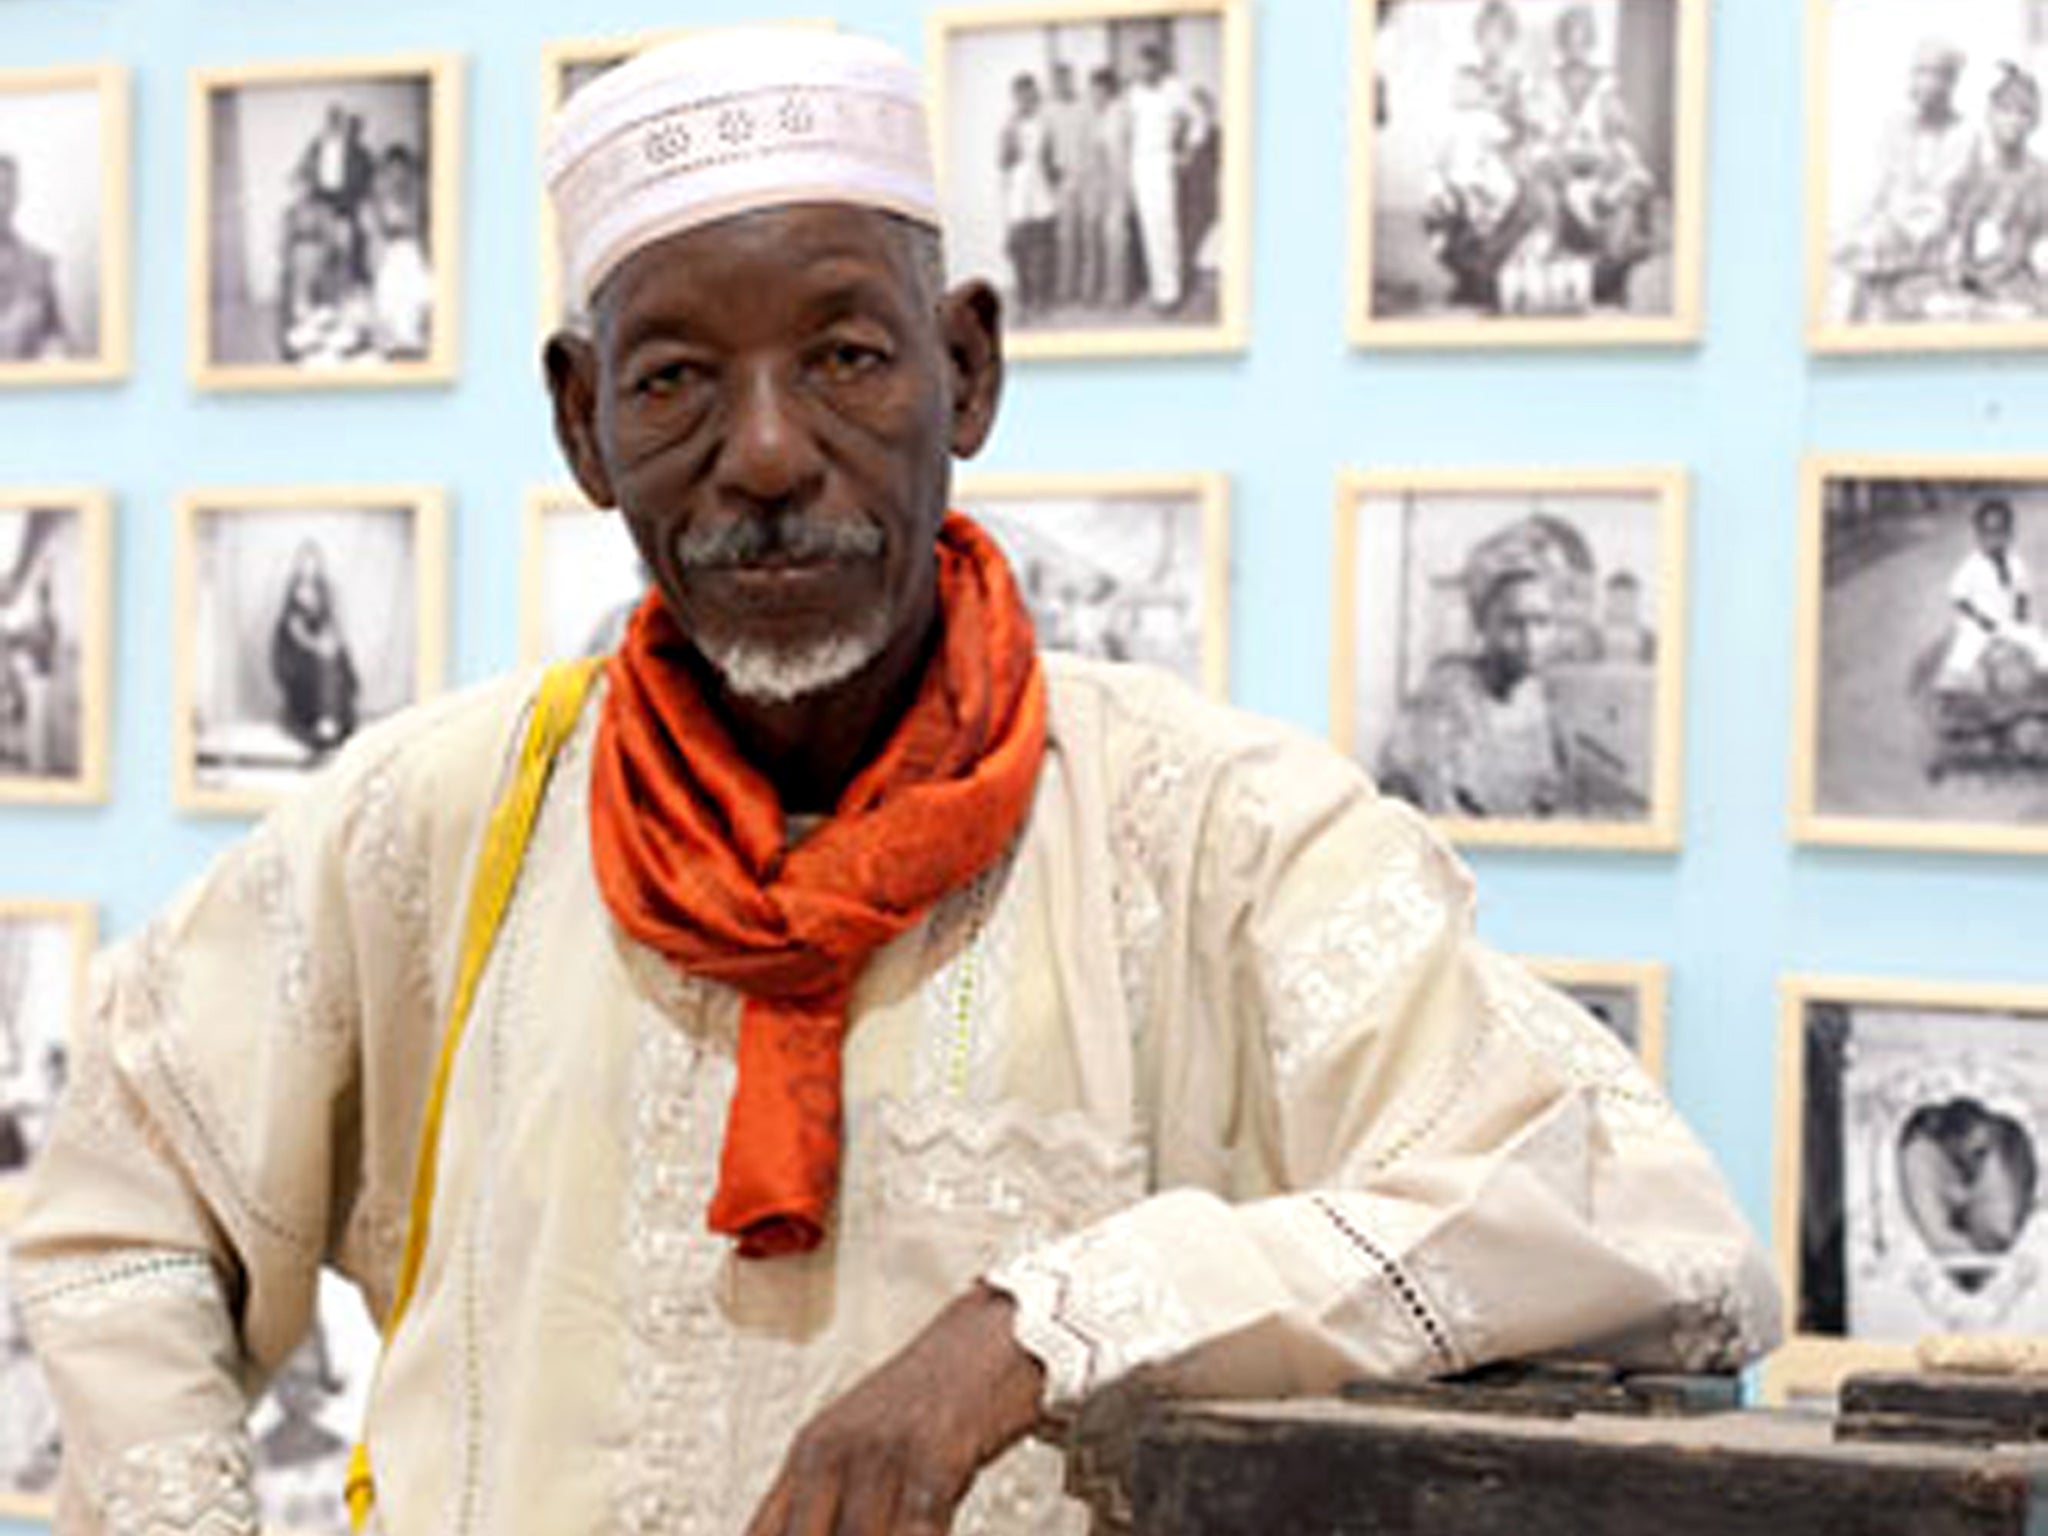 Ly with one of his first cameras and some of his work, at a festival in Dakar in 2010.